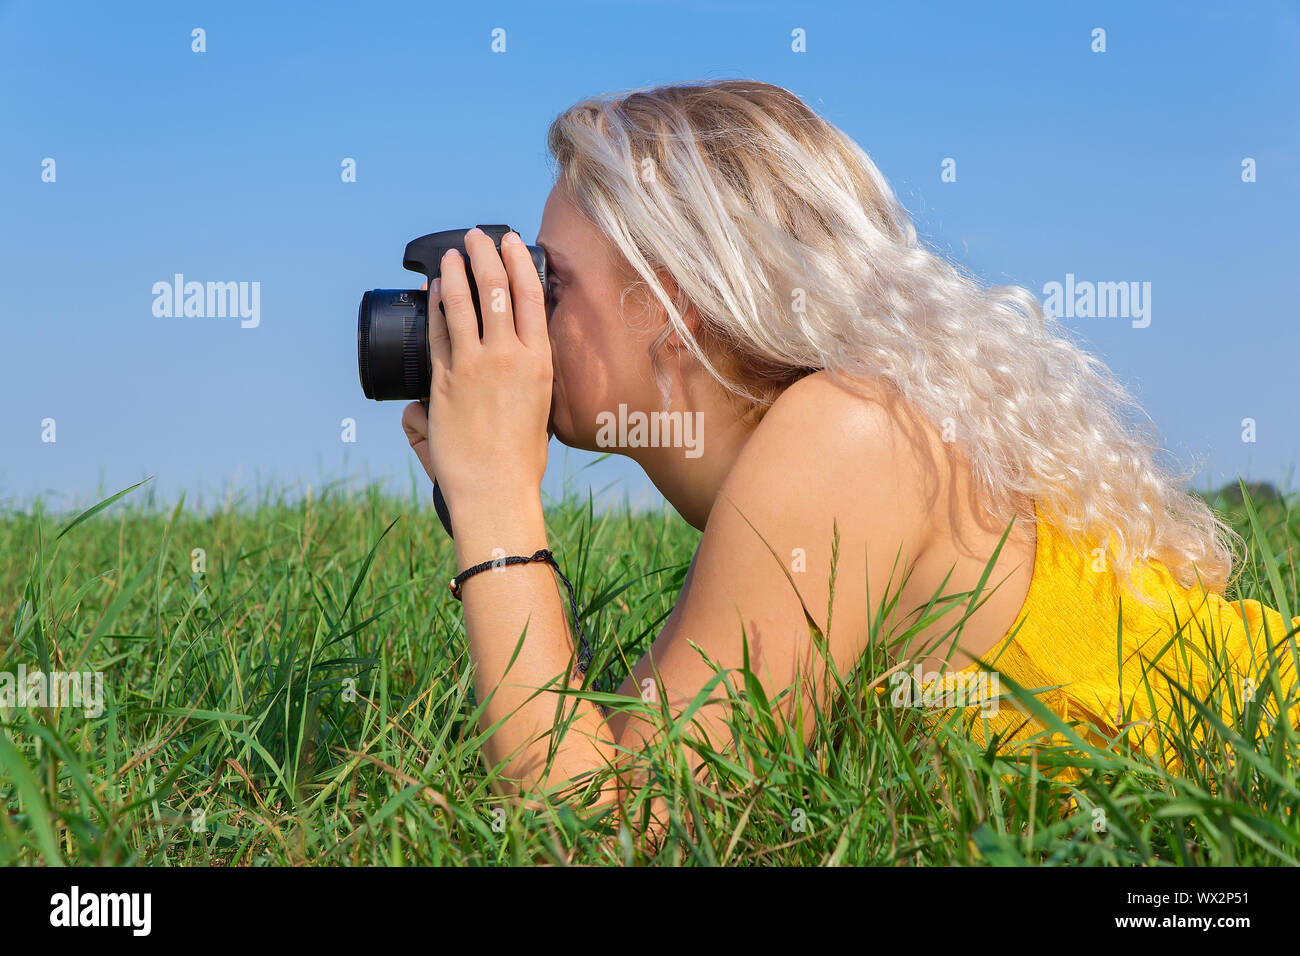 Young blond woman photographing in grass Stock Photo